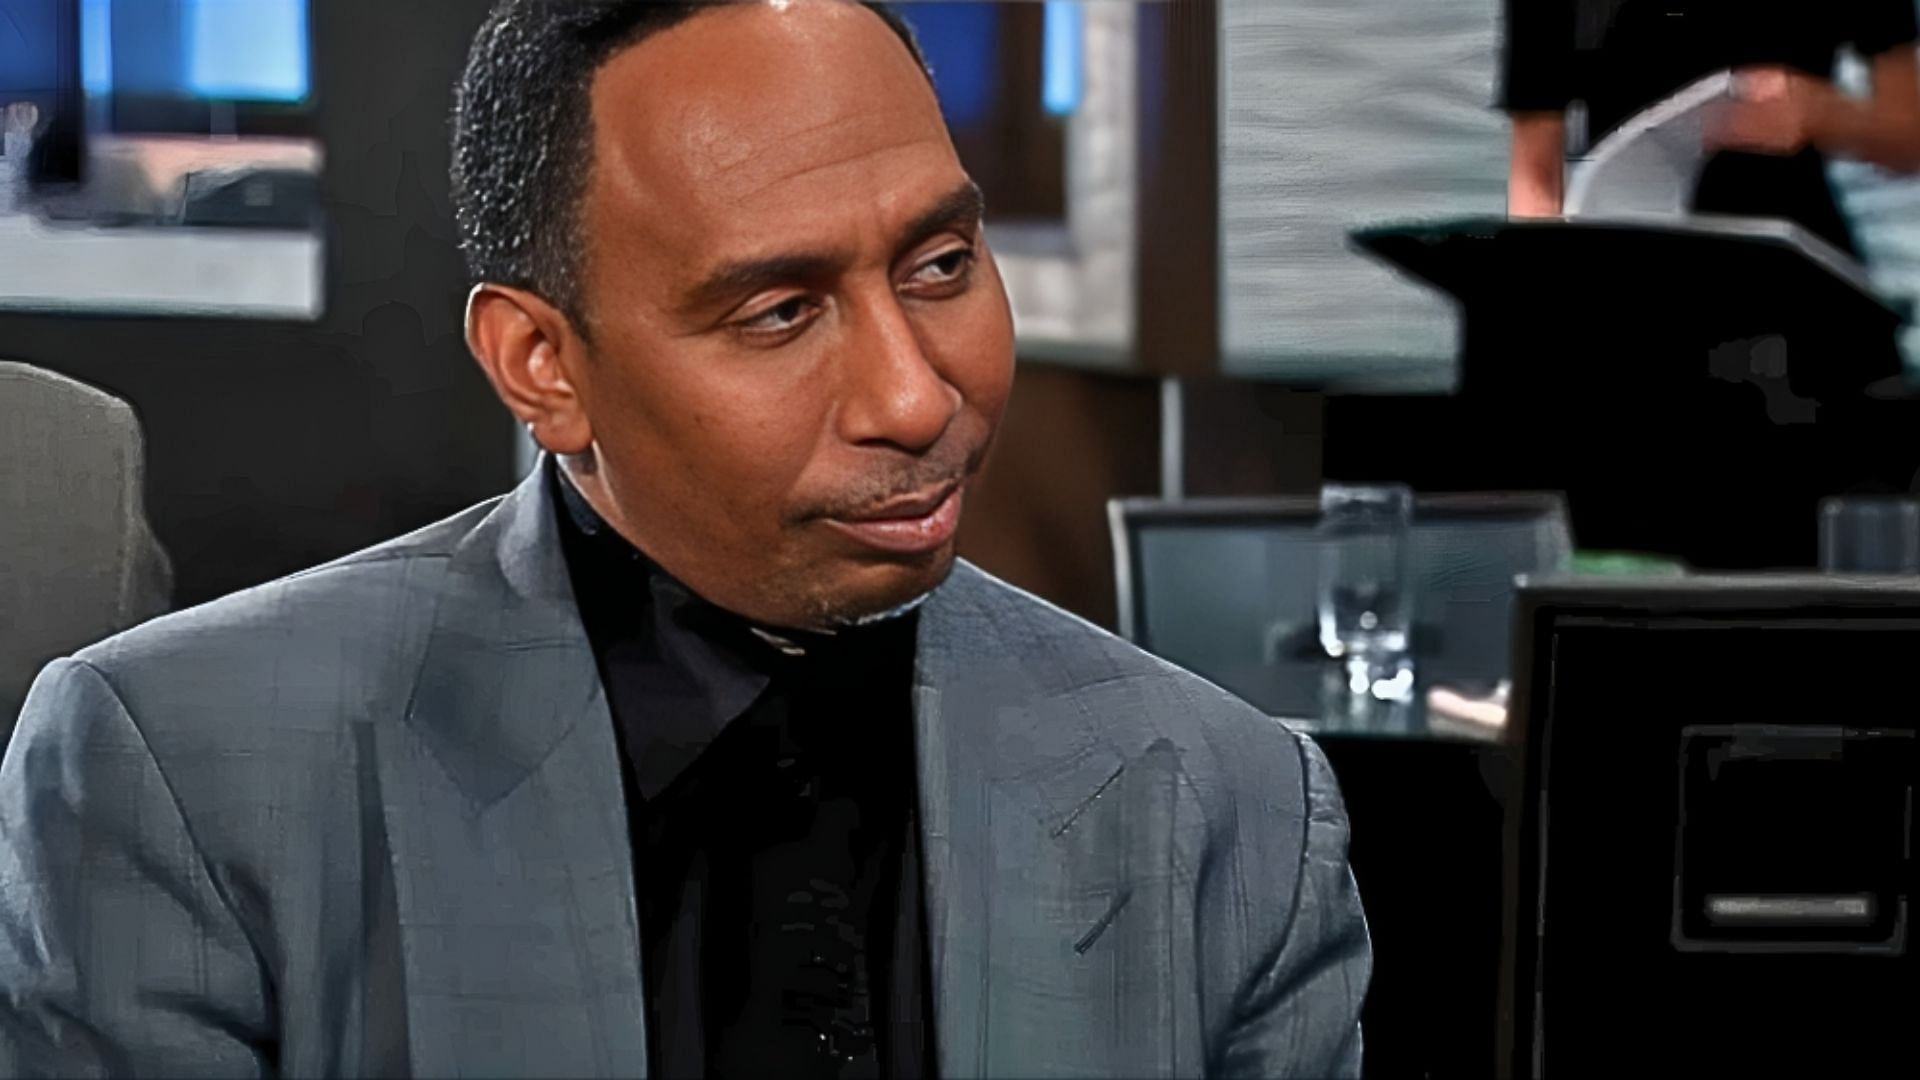 Stephen A. Smith plays the character Brick on General Hospital (Image via YouTube/General Hospital, 1:30)